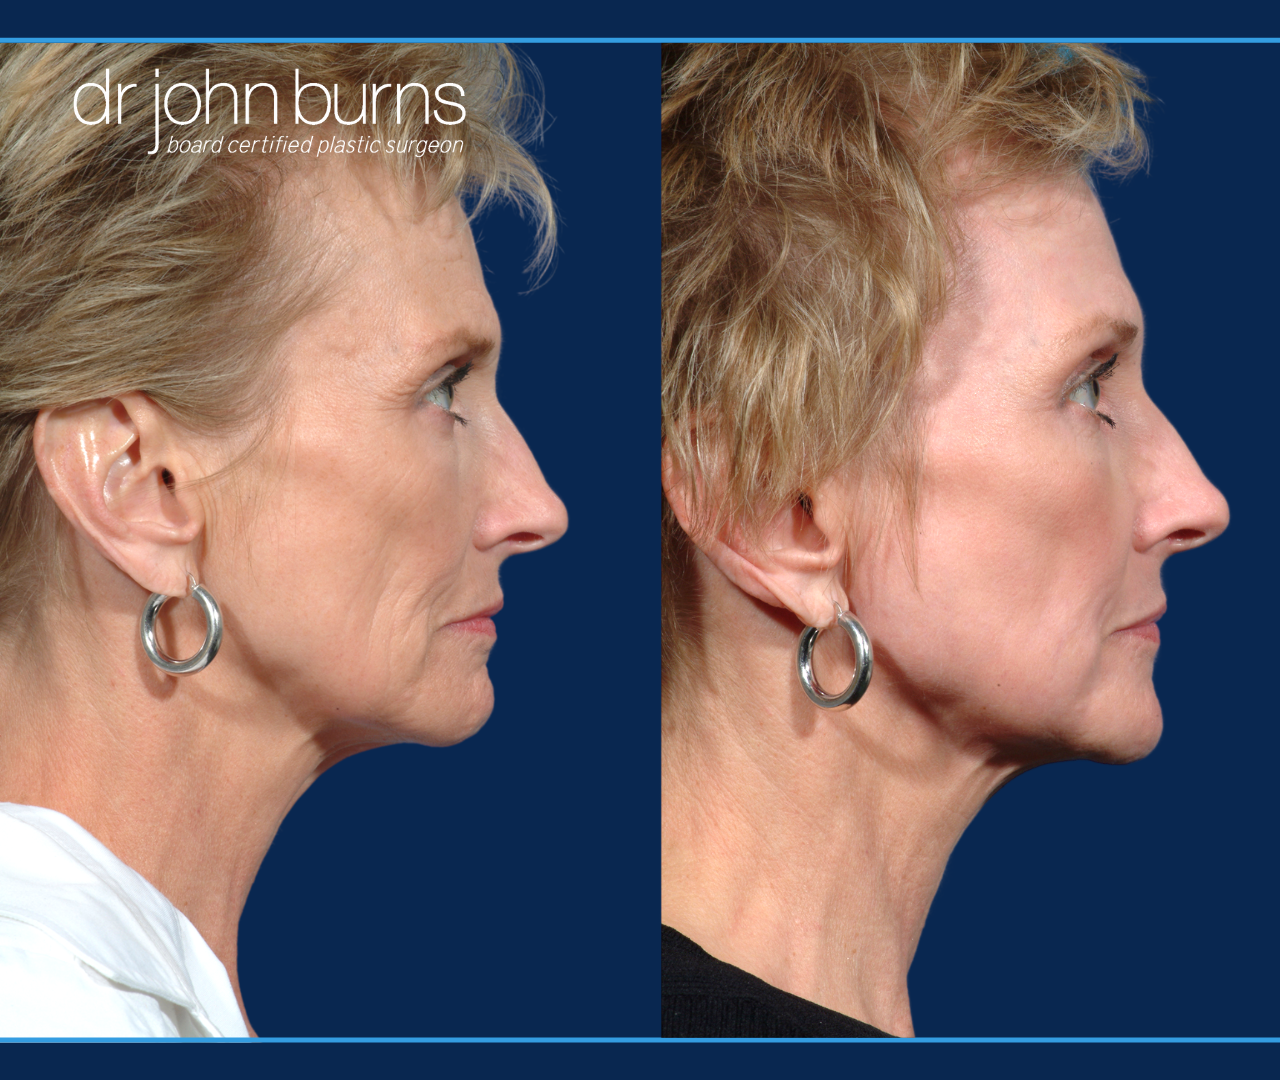 Profile View | Before and after laser skin resurfacing by Dr. John Burns